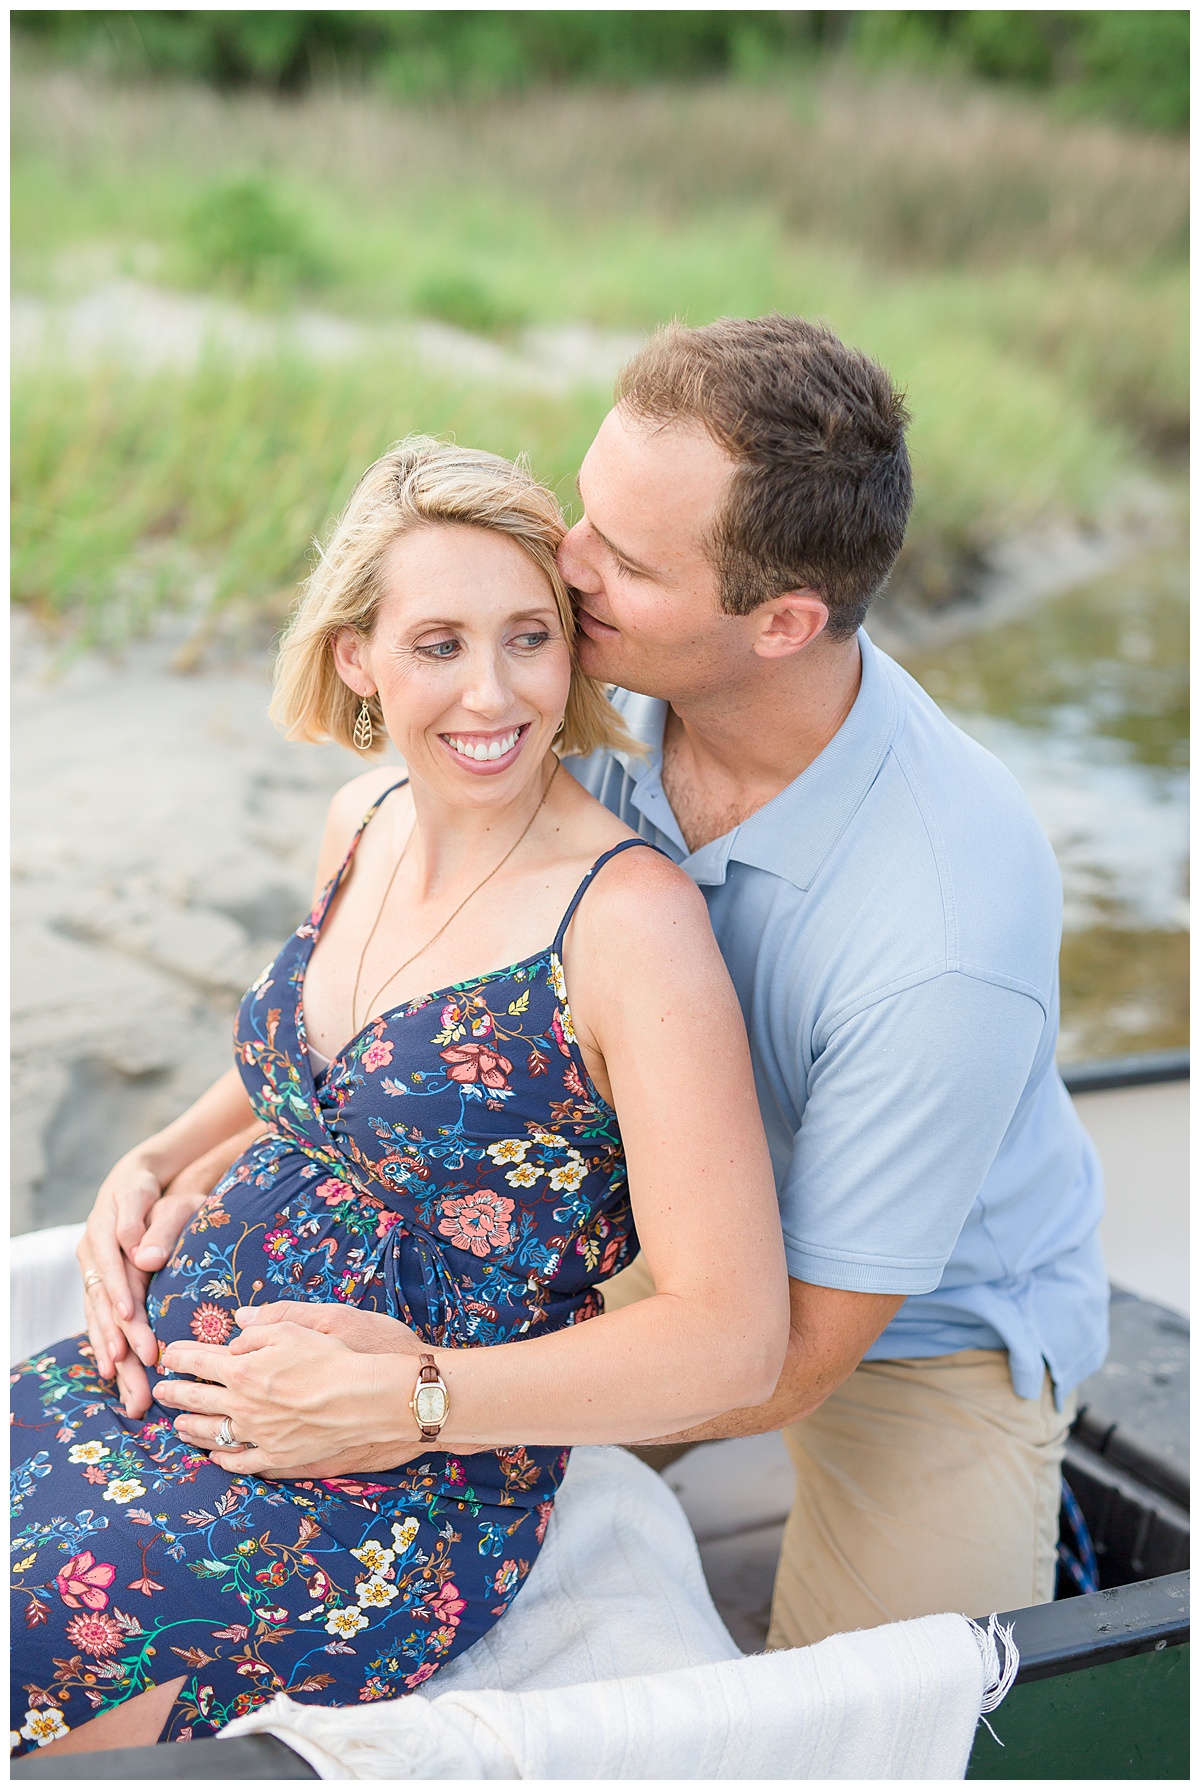 Michele + Jake’s Maternity Session // First Landing State Park